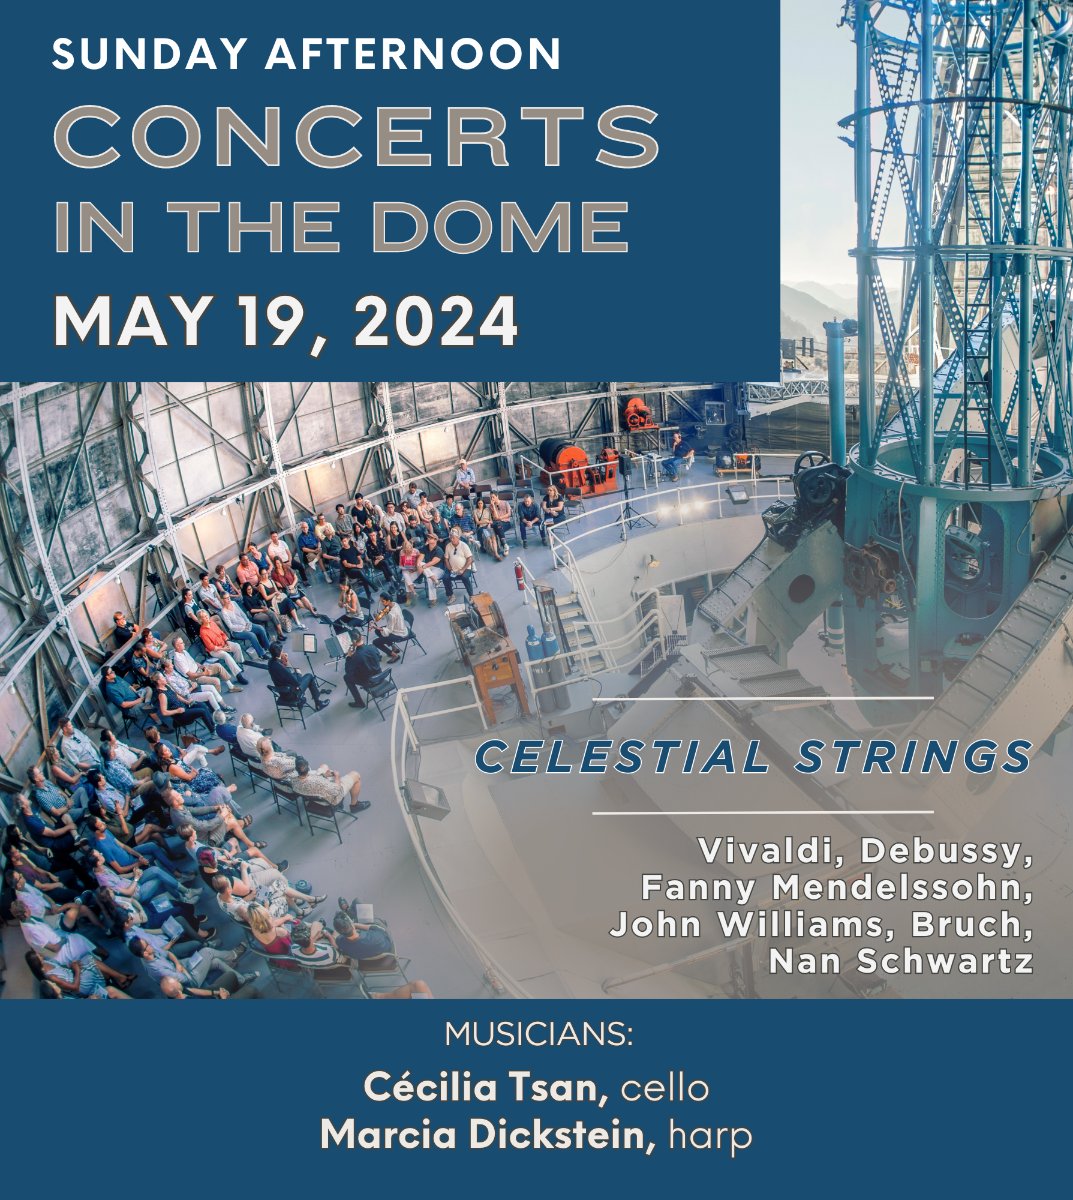 May 19, 2024 | 3 & 5PM: Sunday Afternoon Concerts in the Dome. CELESTIAL STRINGS: Cécilia Tsan (cello) and Marcia Dickstein (harp) playing works by Vivaldi, Debussy, Fanny Mendelssohn, John Williams, Bruch and Nan Schwartz. TIX AVAILABLE @ mtwilson.edu/events/concert…